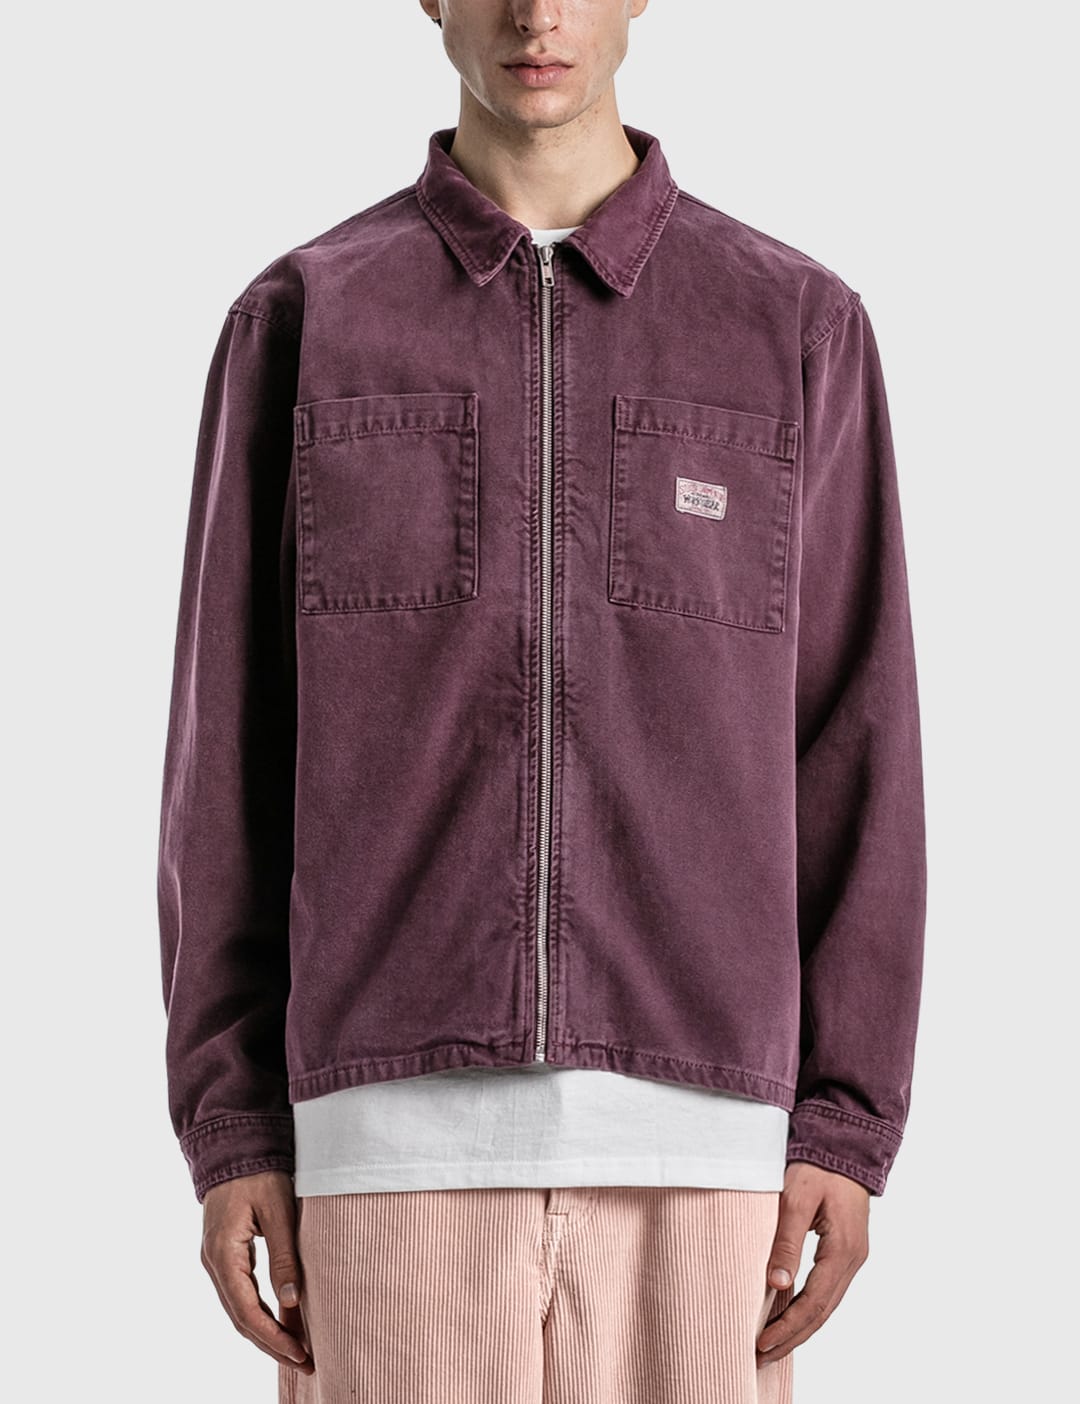 Stüssy - Washed Canvas Zip Shirt | HBX - Globally Curated Fashion